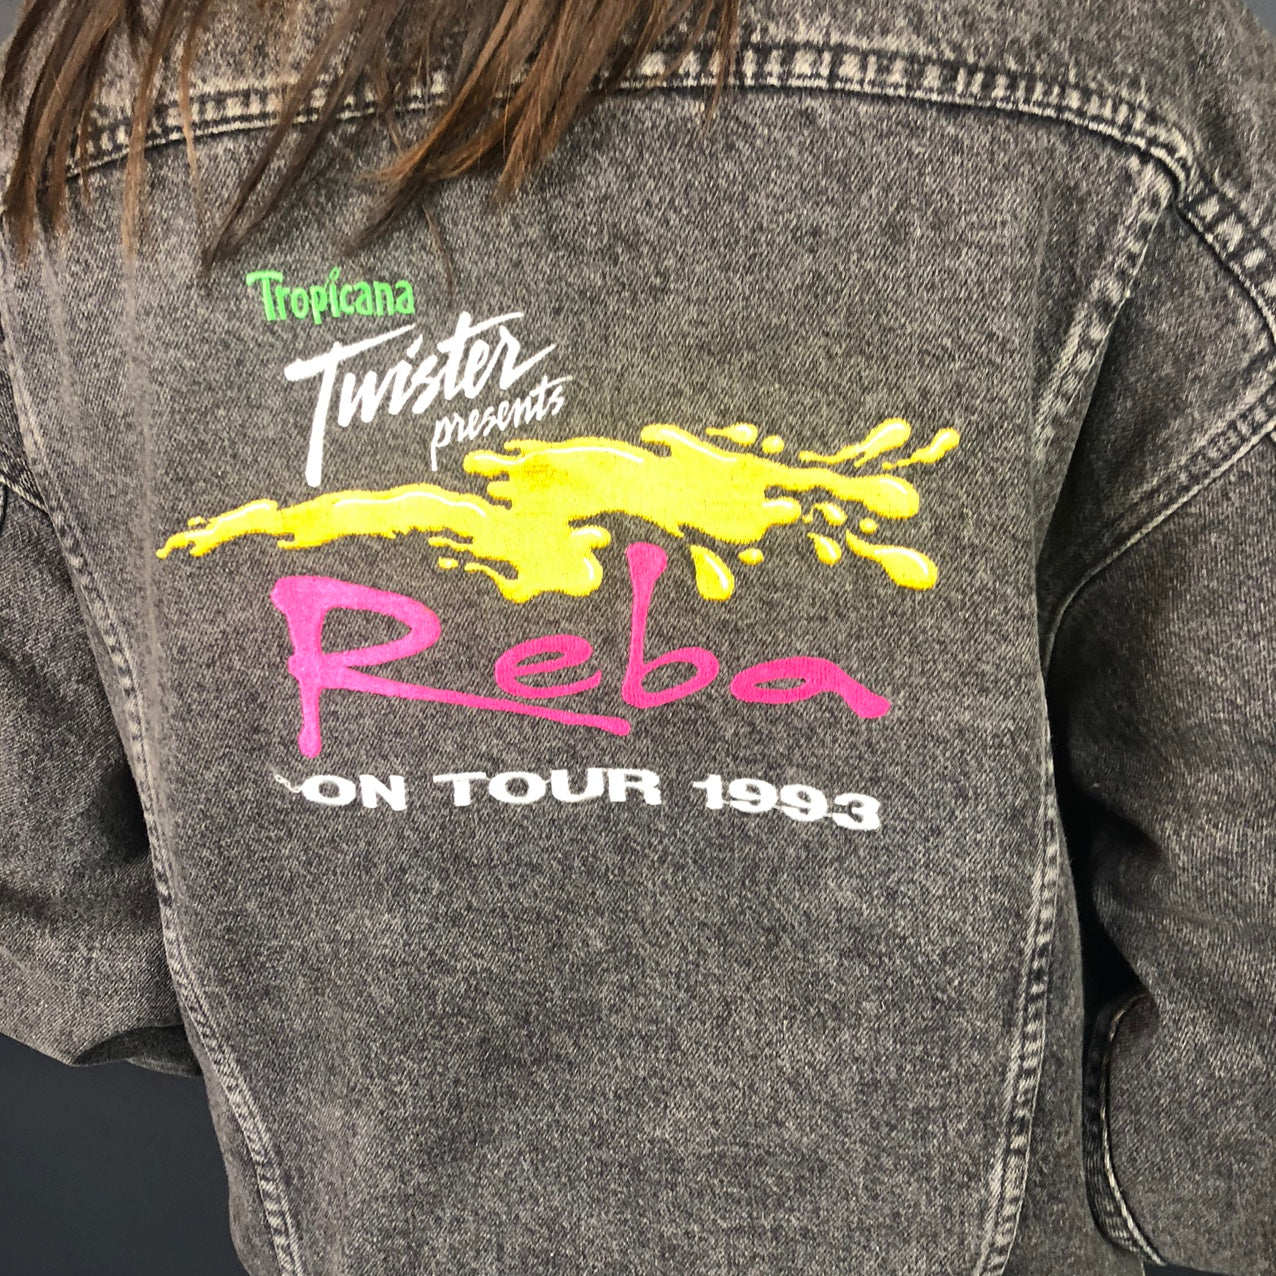 SUPER RARE Reba McEntire on Tour 1993 Vintage Denim Jacket with Tropicana Embroidery - Large